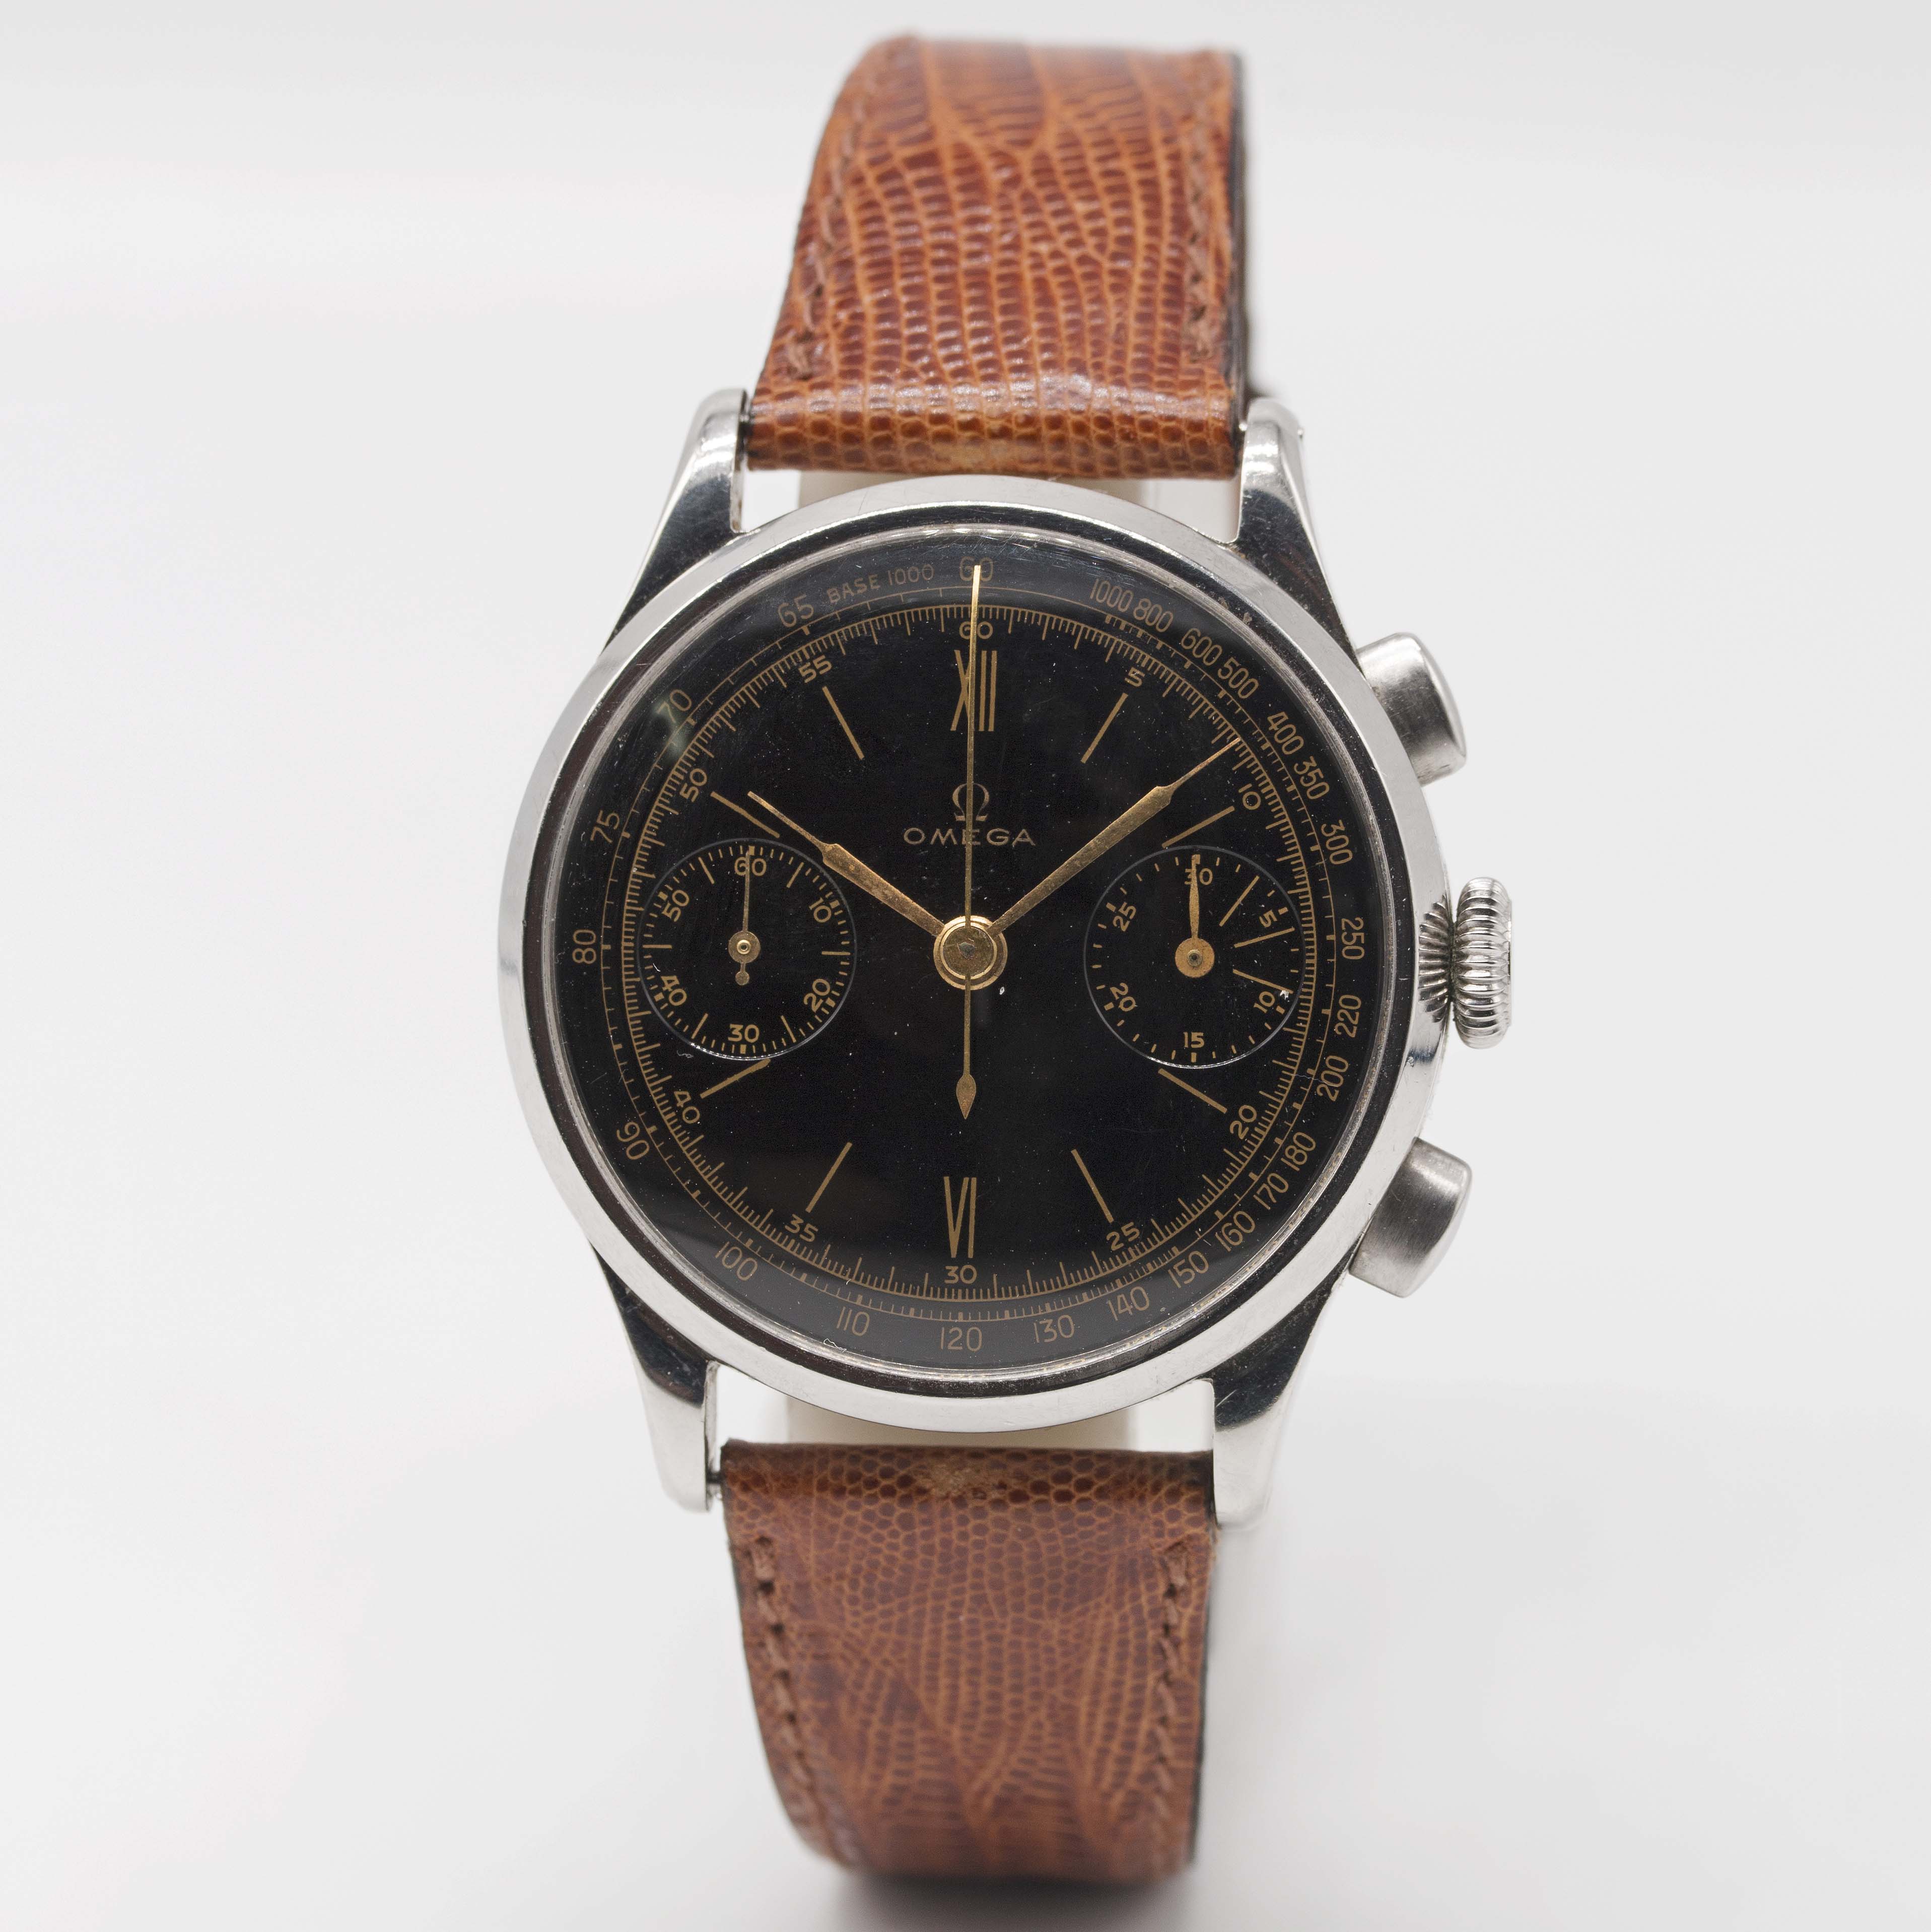 A VERY RARE GENTLEMAN'S LARGE SIZE STAINLESS STEEL OMEGA "33.3" CHRONOGRAPH WRIST WATCH CIRCA - Image 3 of 11